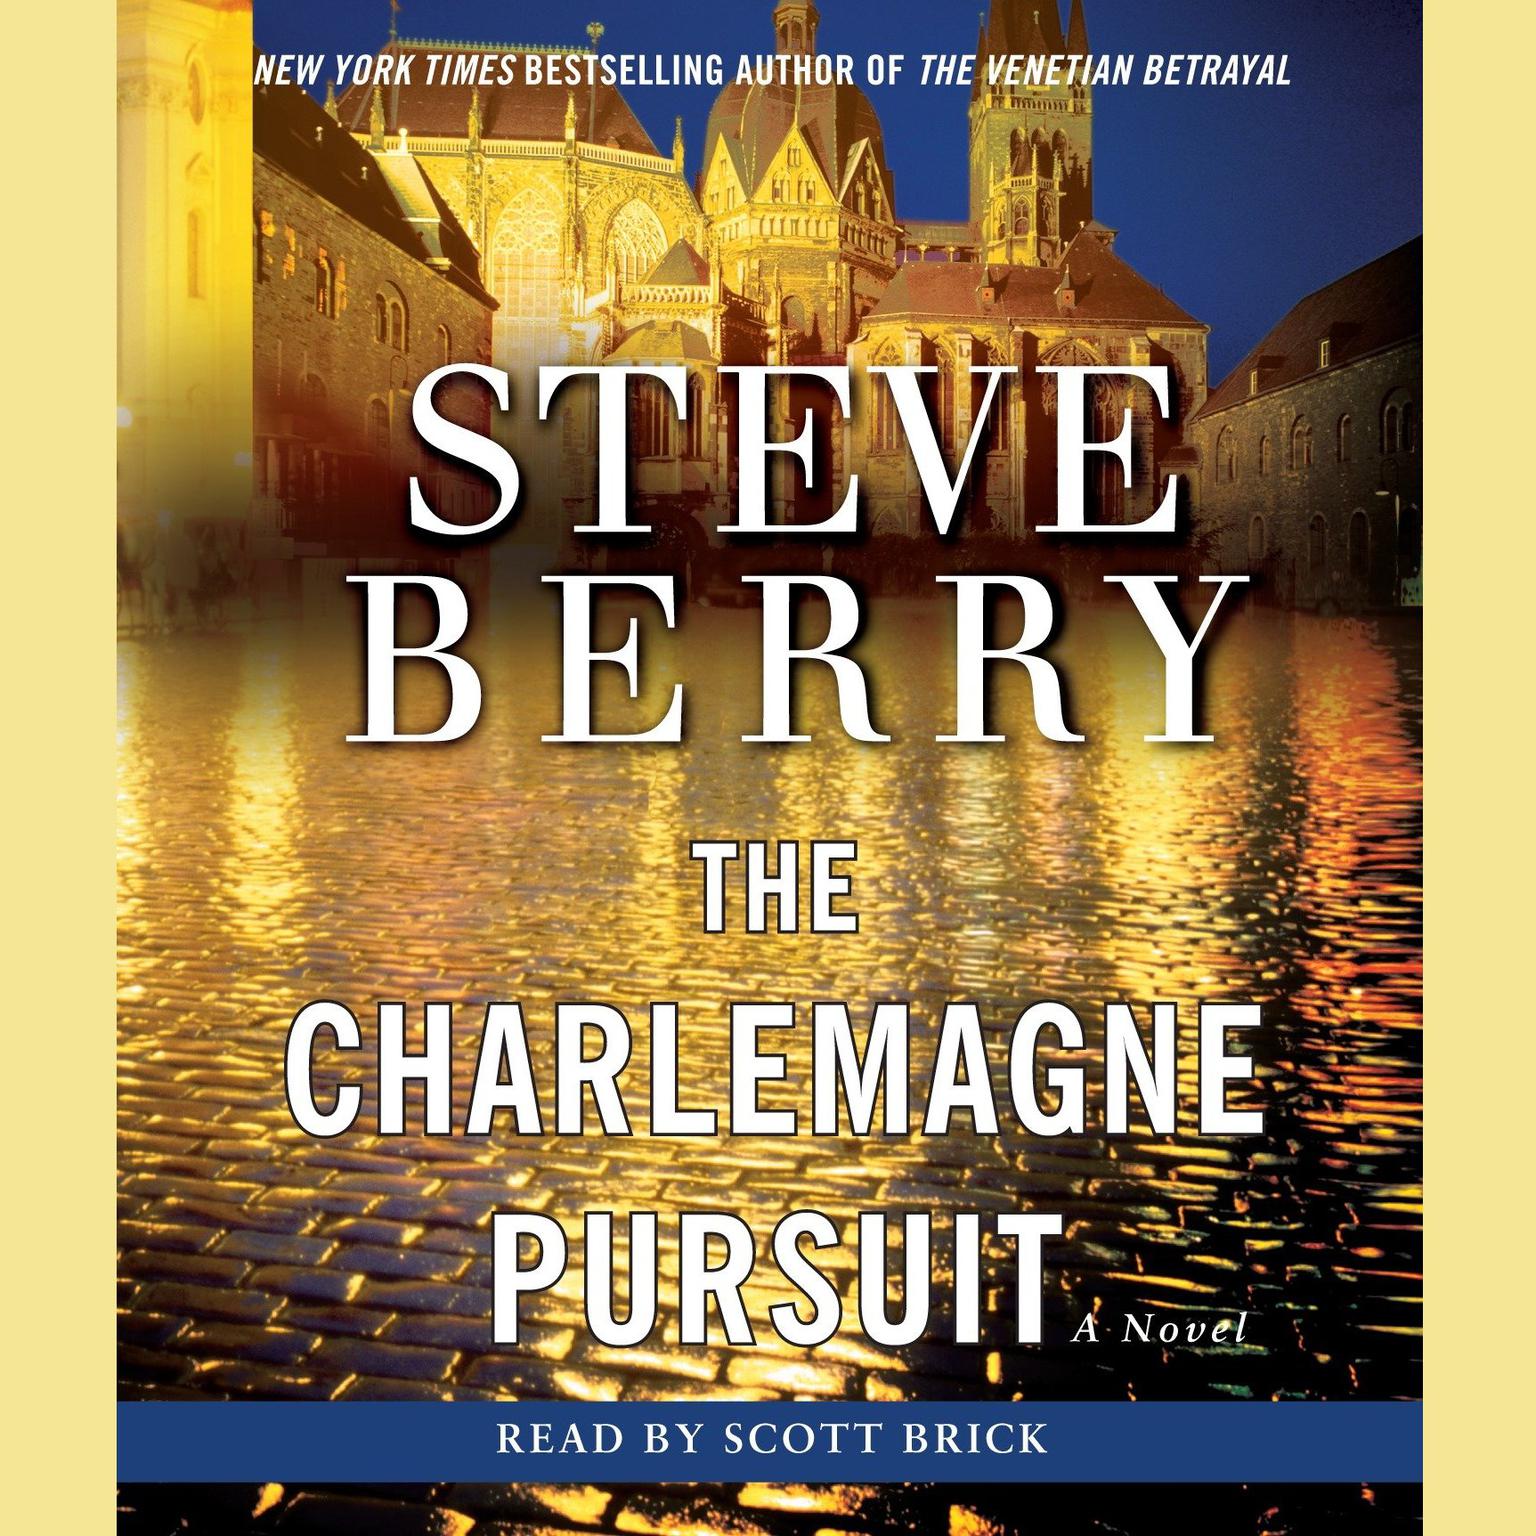 The Charlemagne Pursuit (Abridged): A Novel Audiobook, by Steve Berry